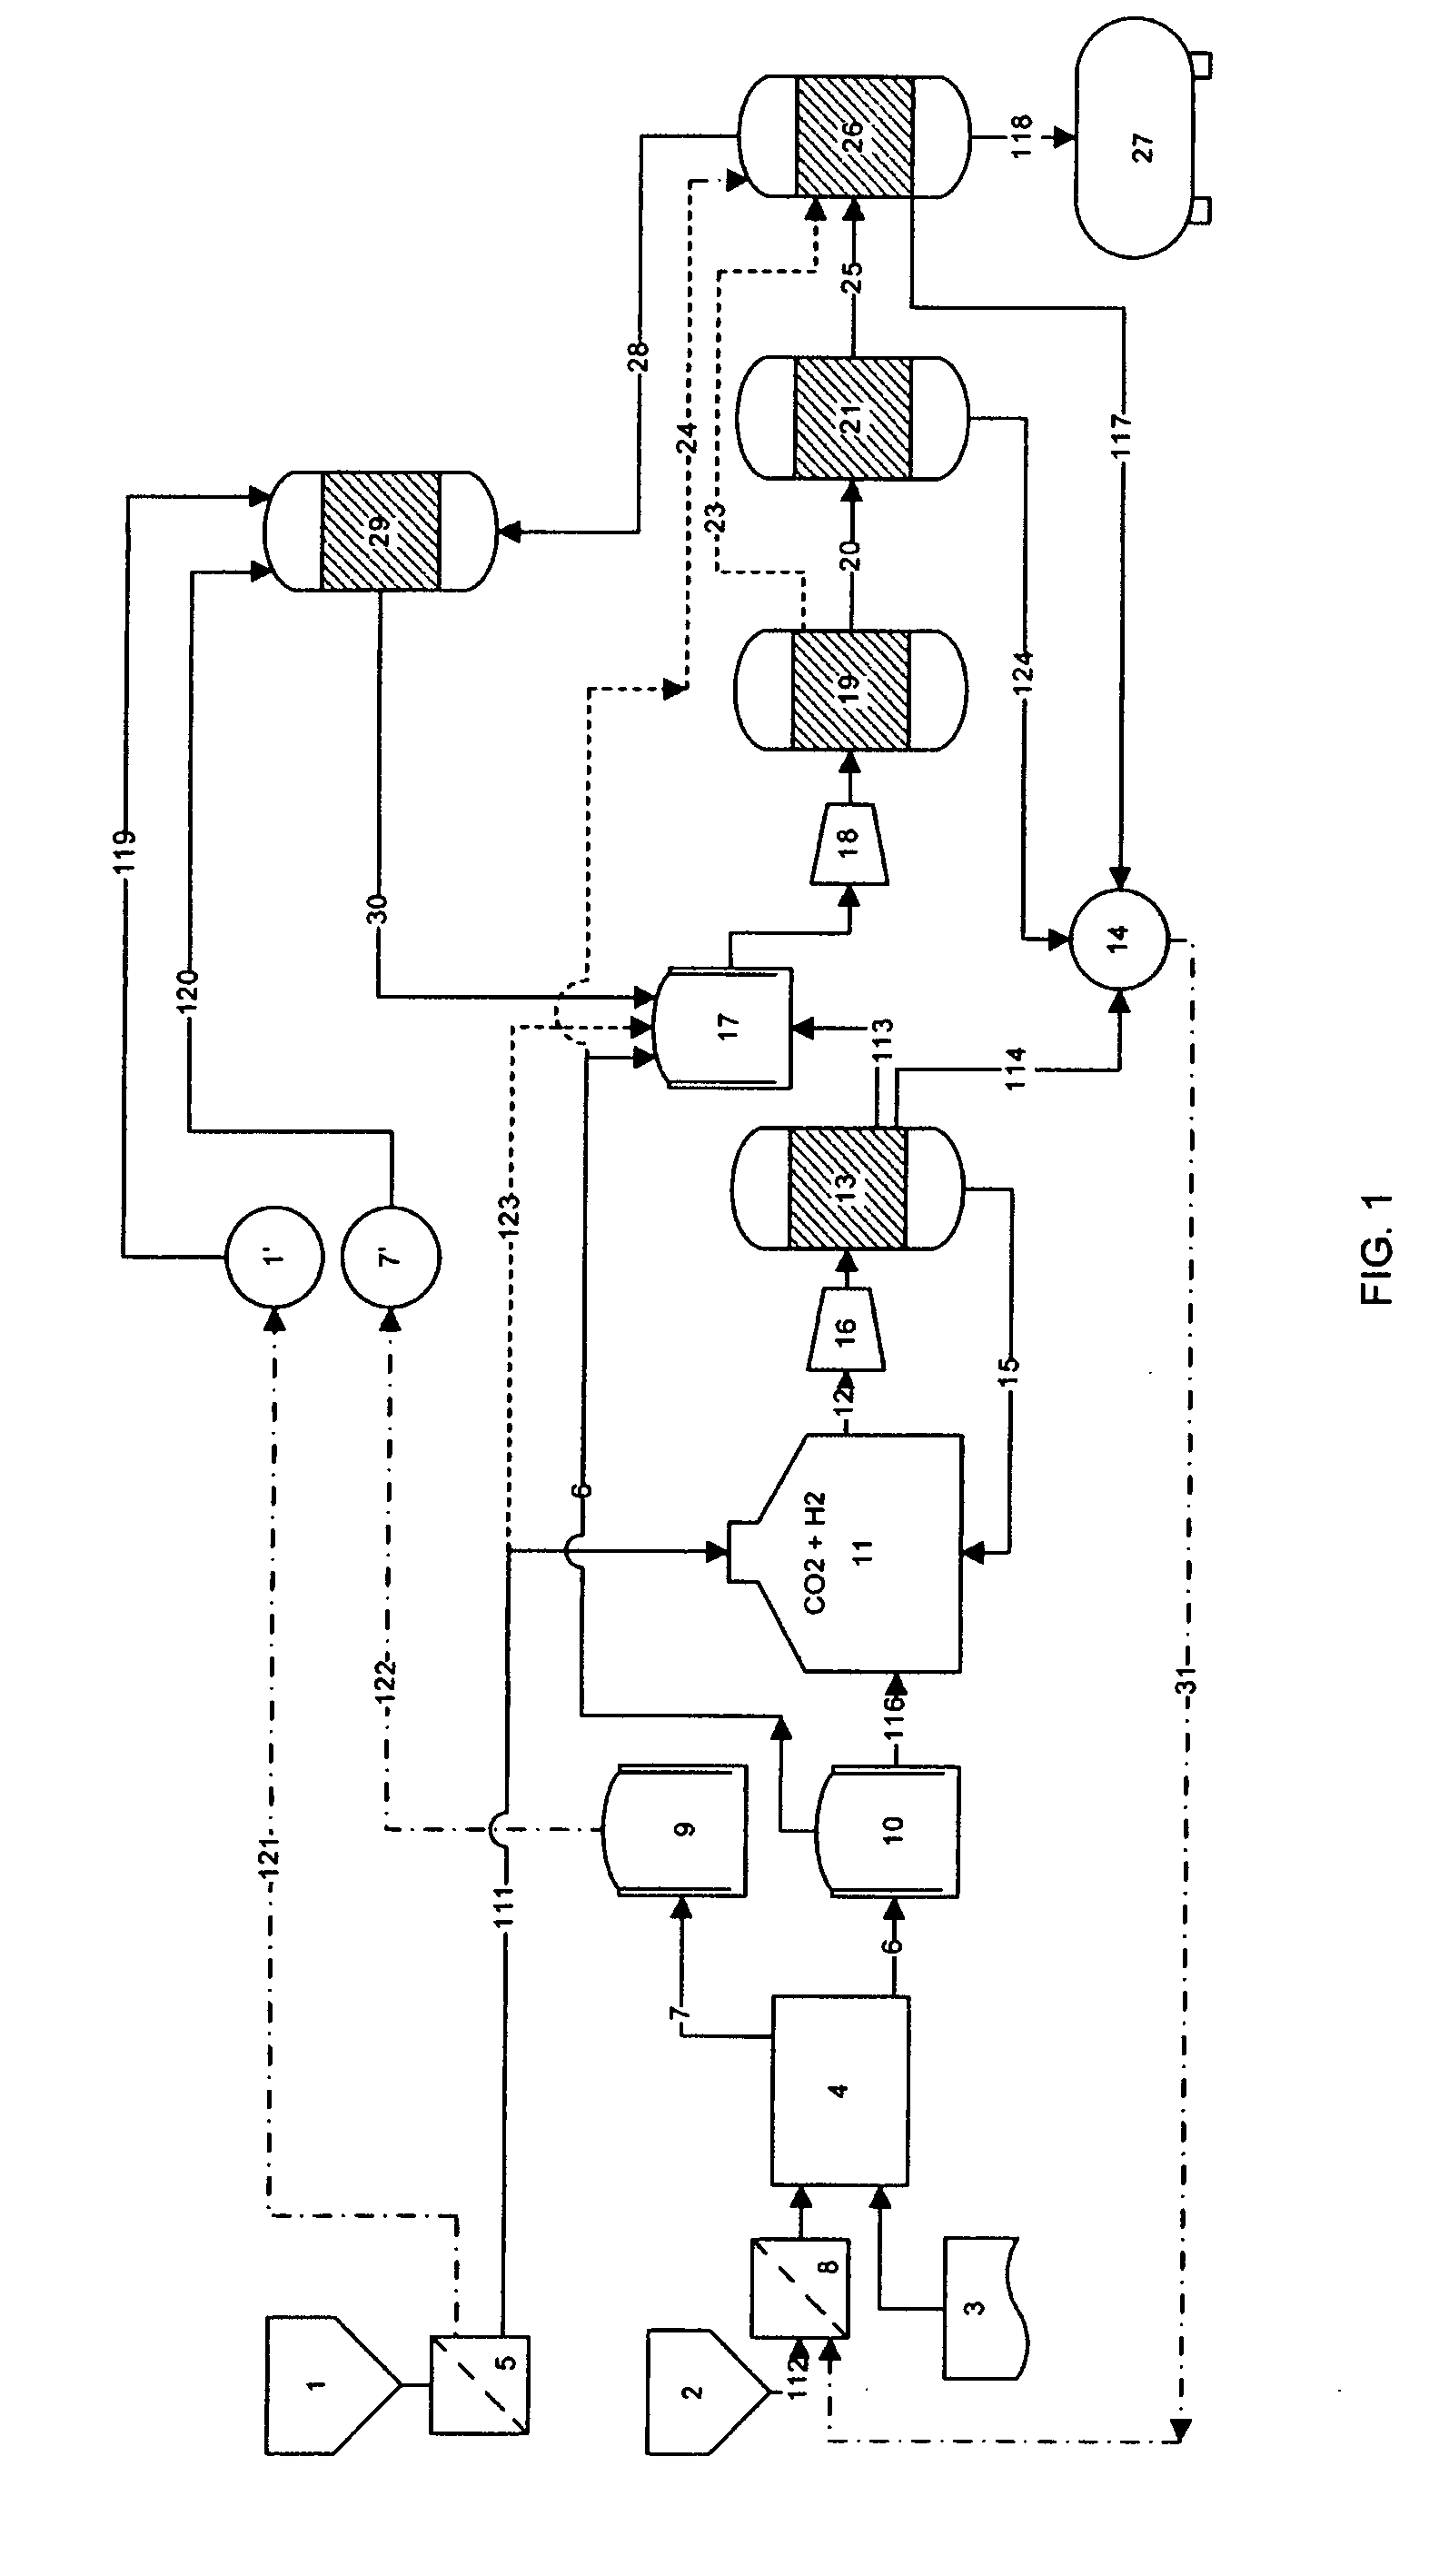 Process for producing liquid fuel from carbon dioxide and water